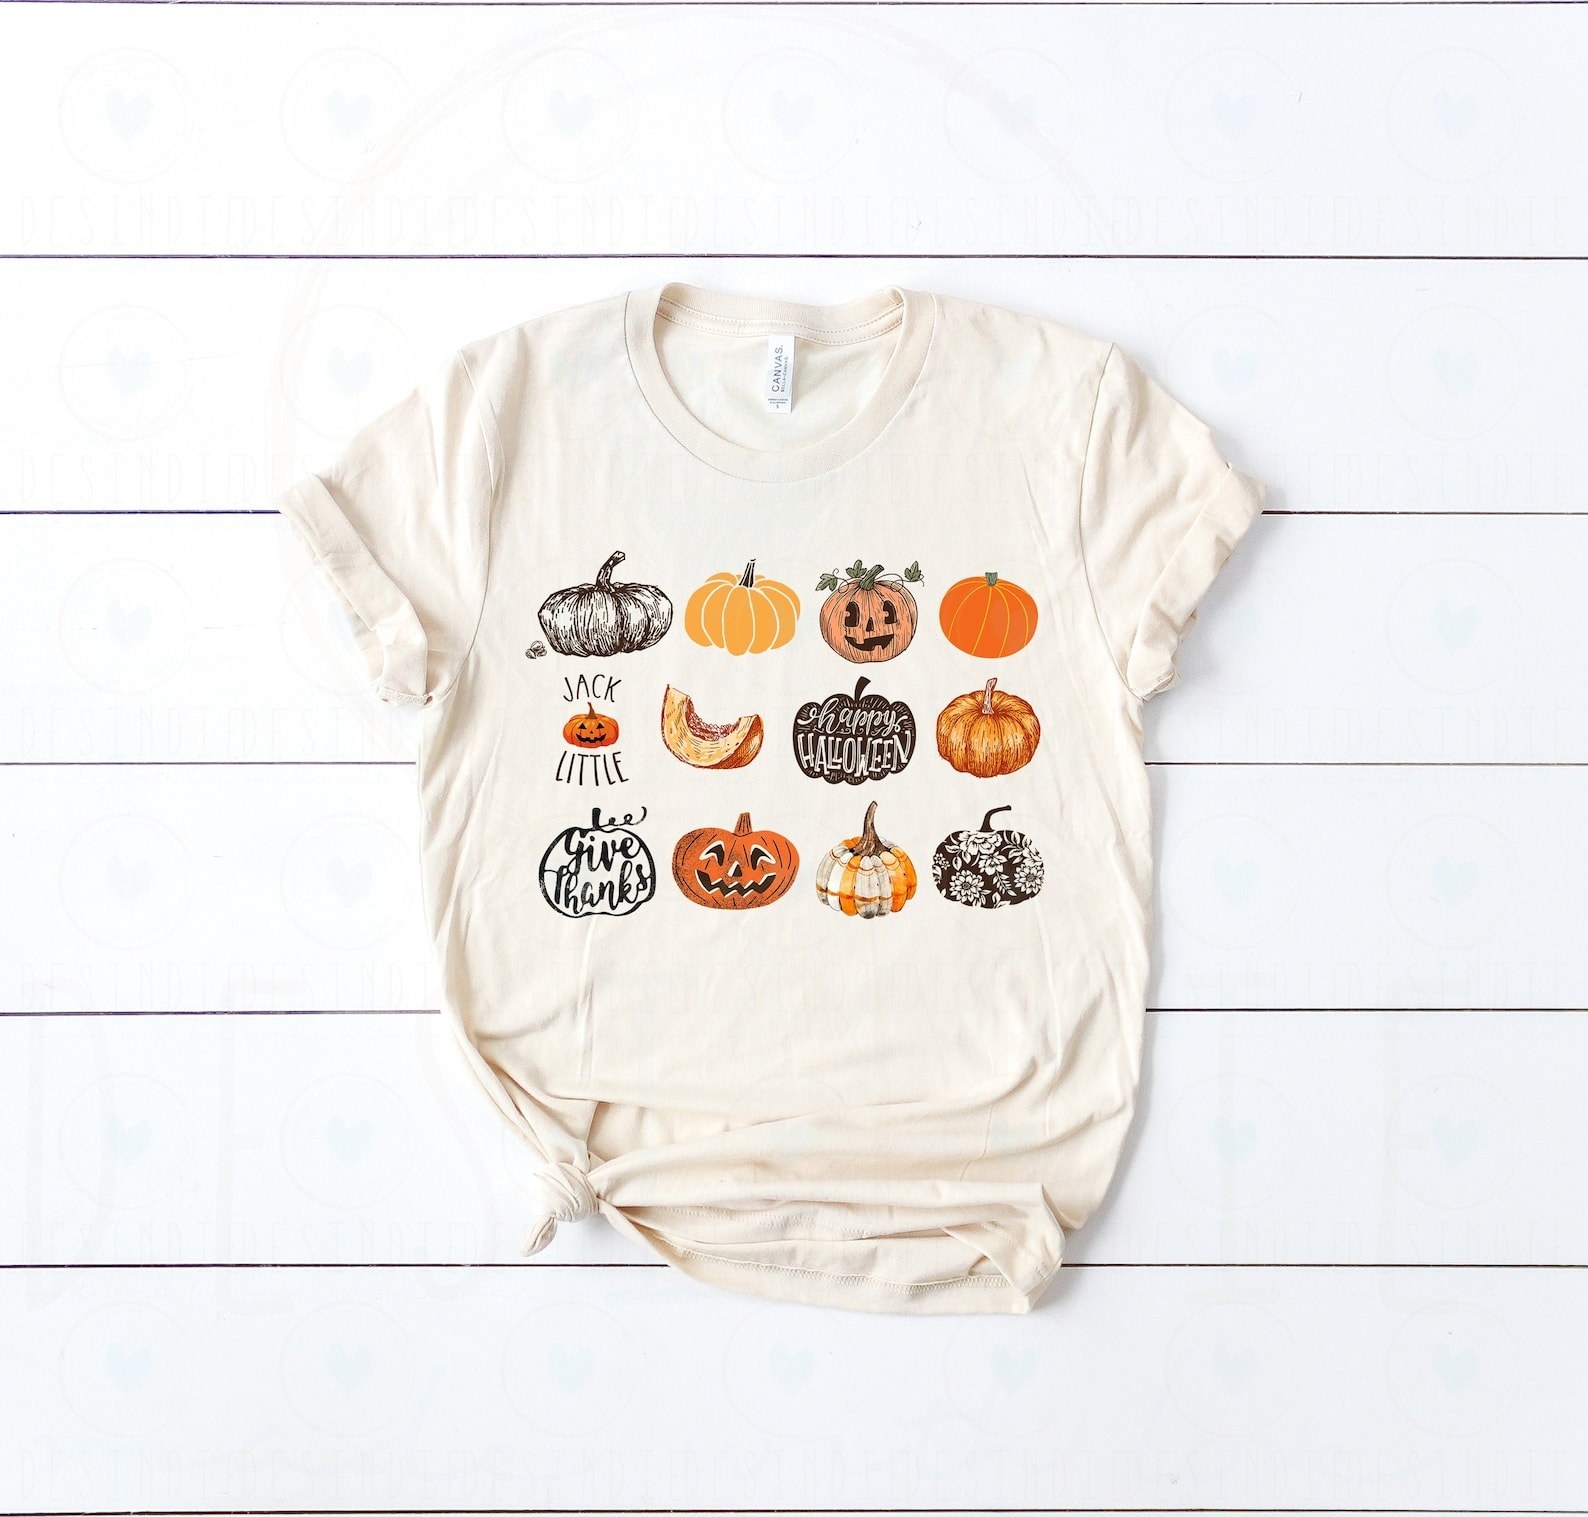 The white T-shirt with 12 different styles of pumpkins printed on it in a grid format